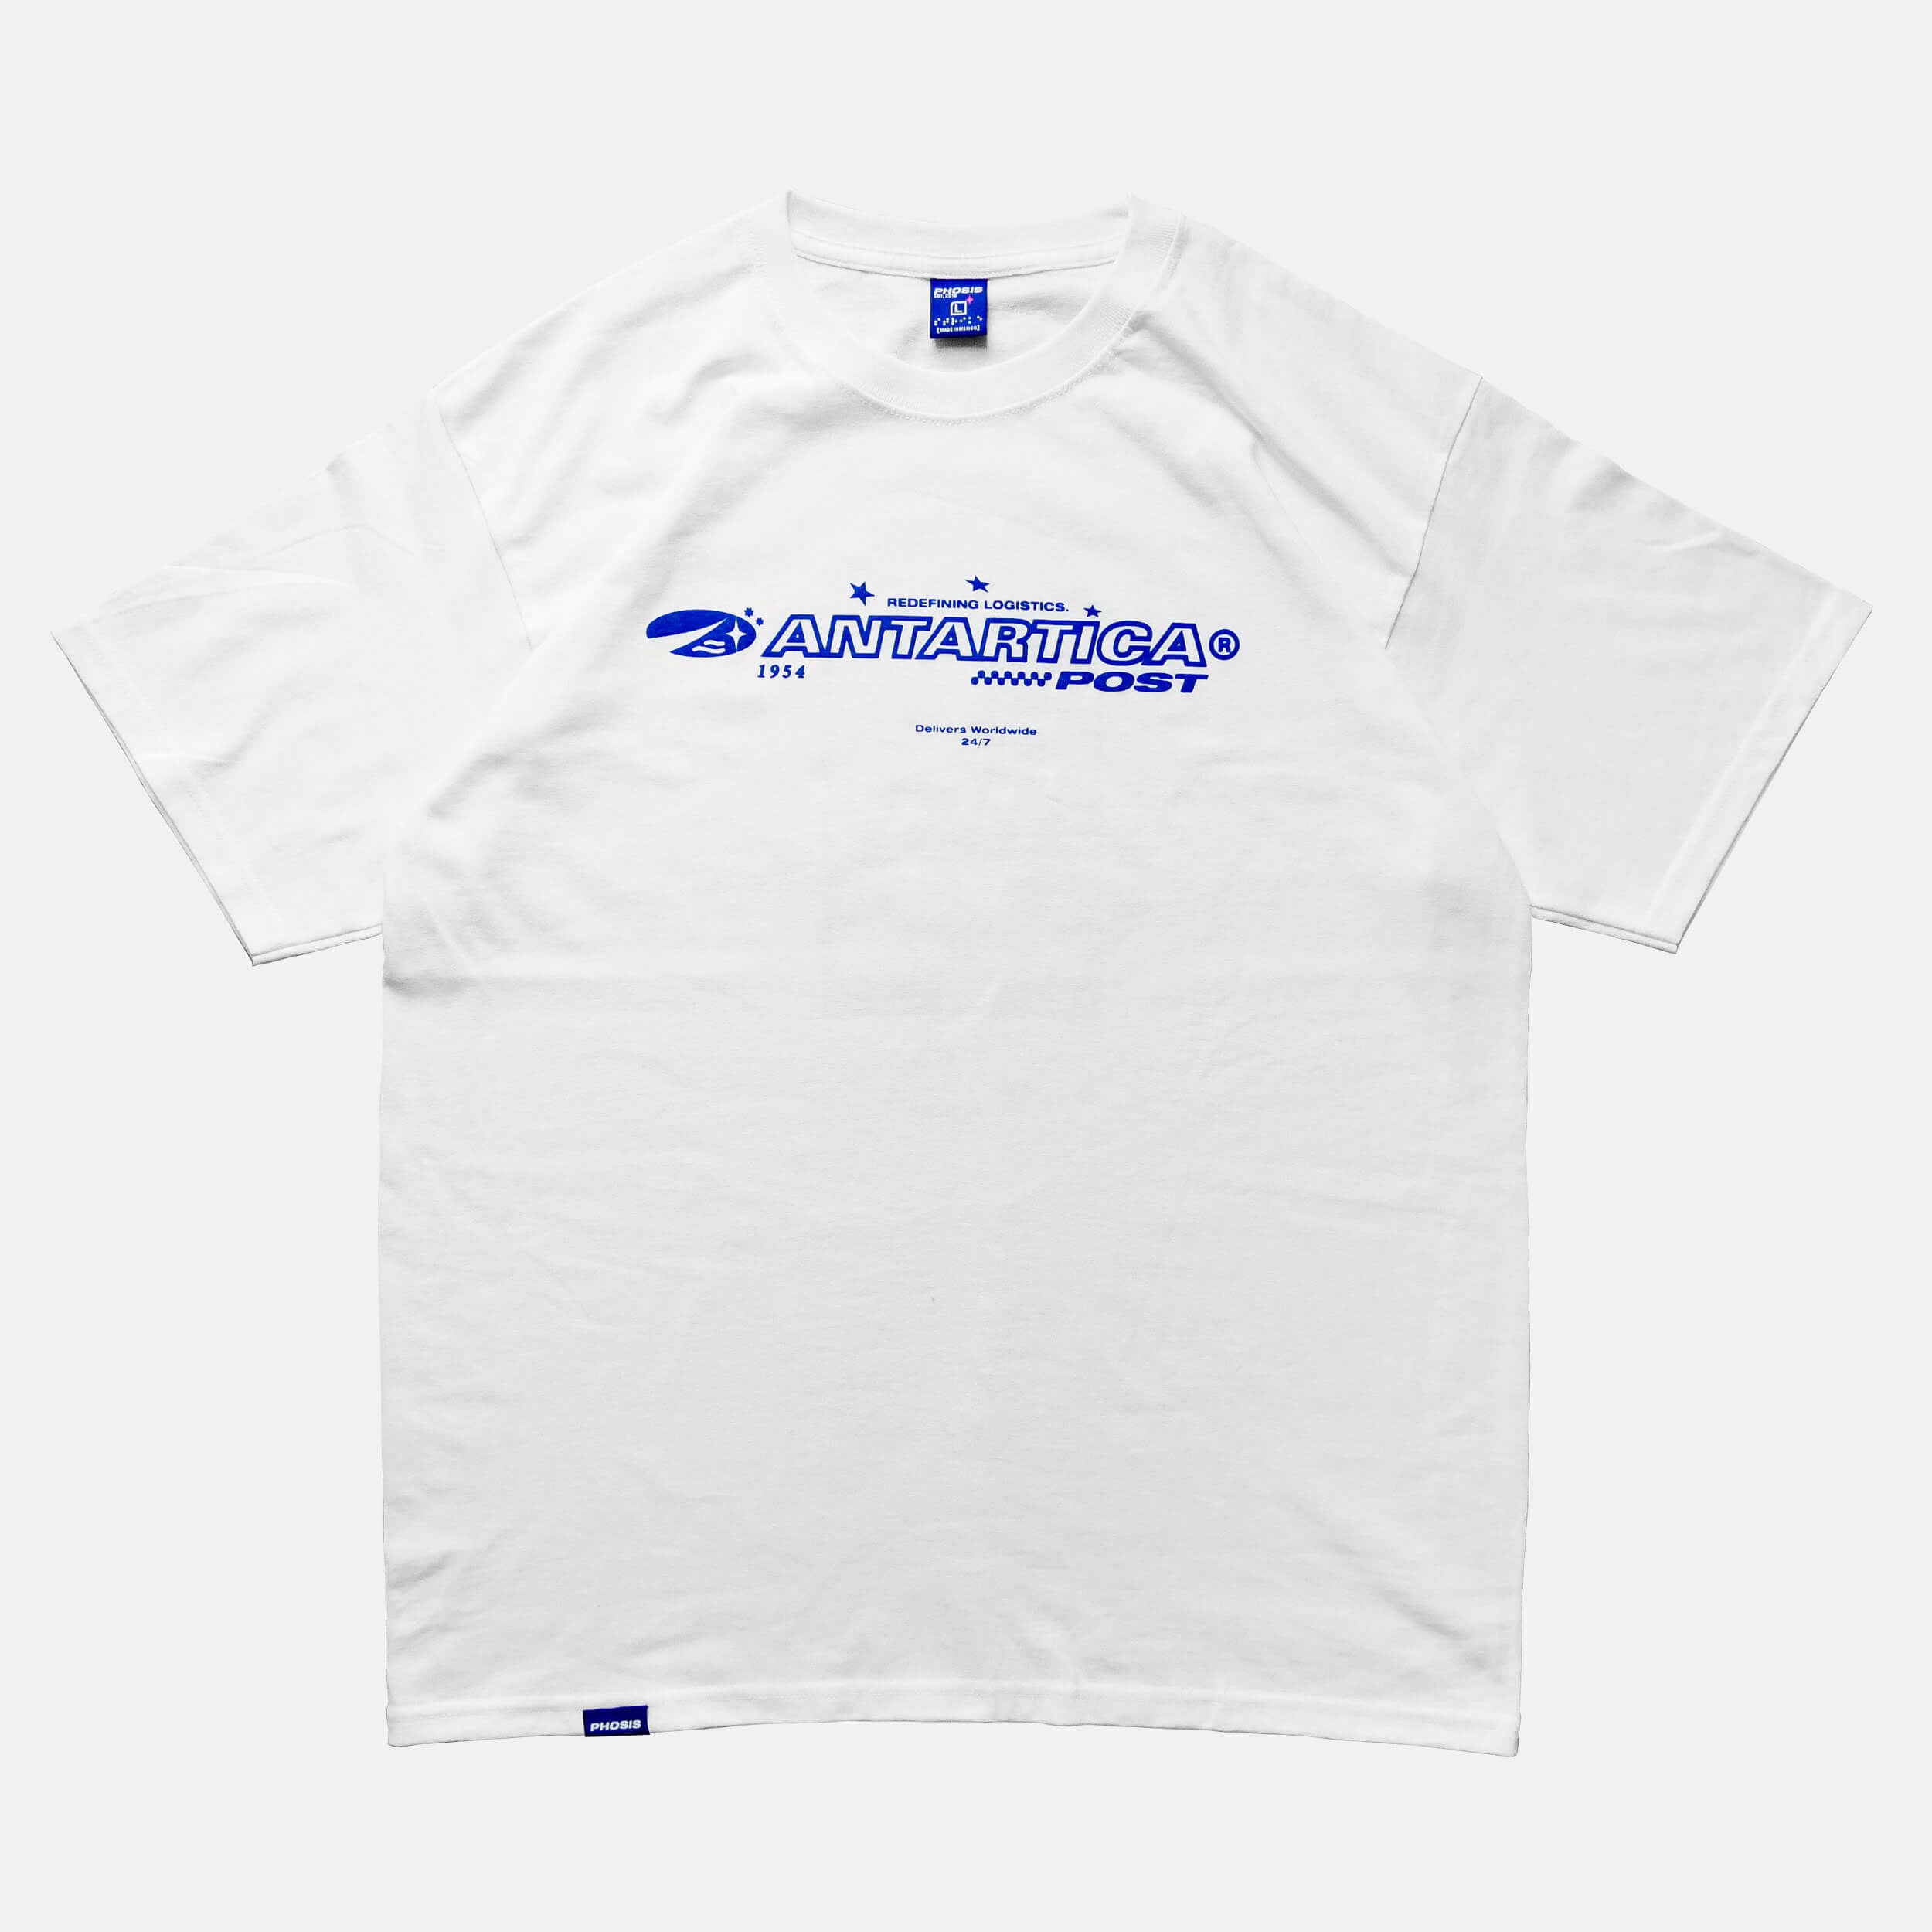 Front view of the screen-pinted ANTARTICA POST white t-shirt from PHOSIS Clothing